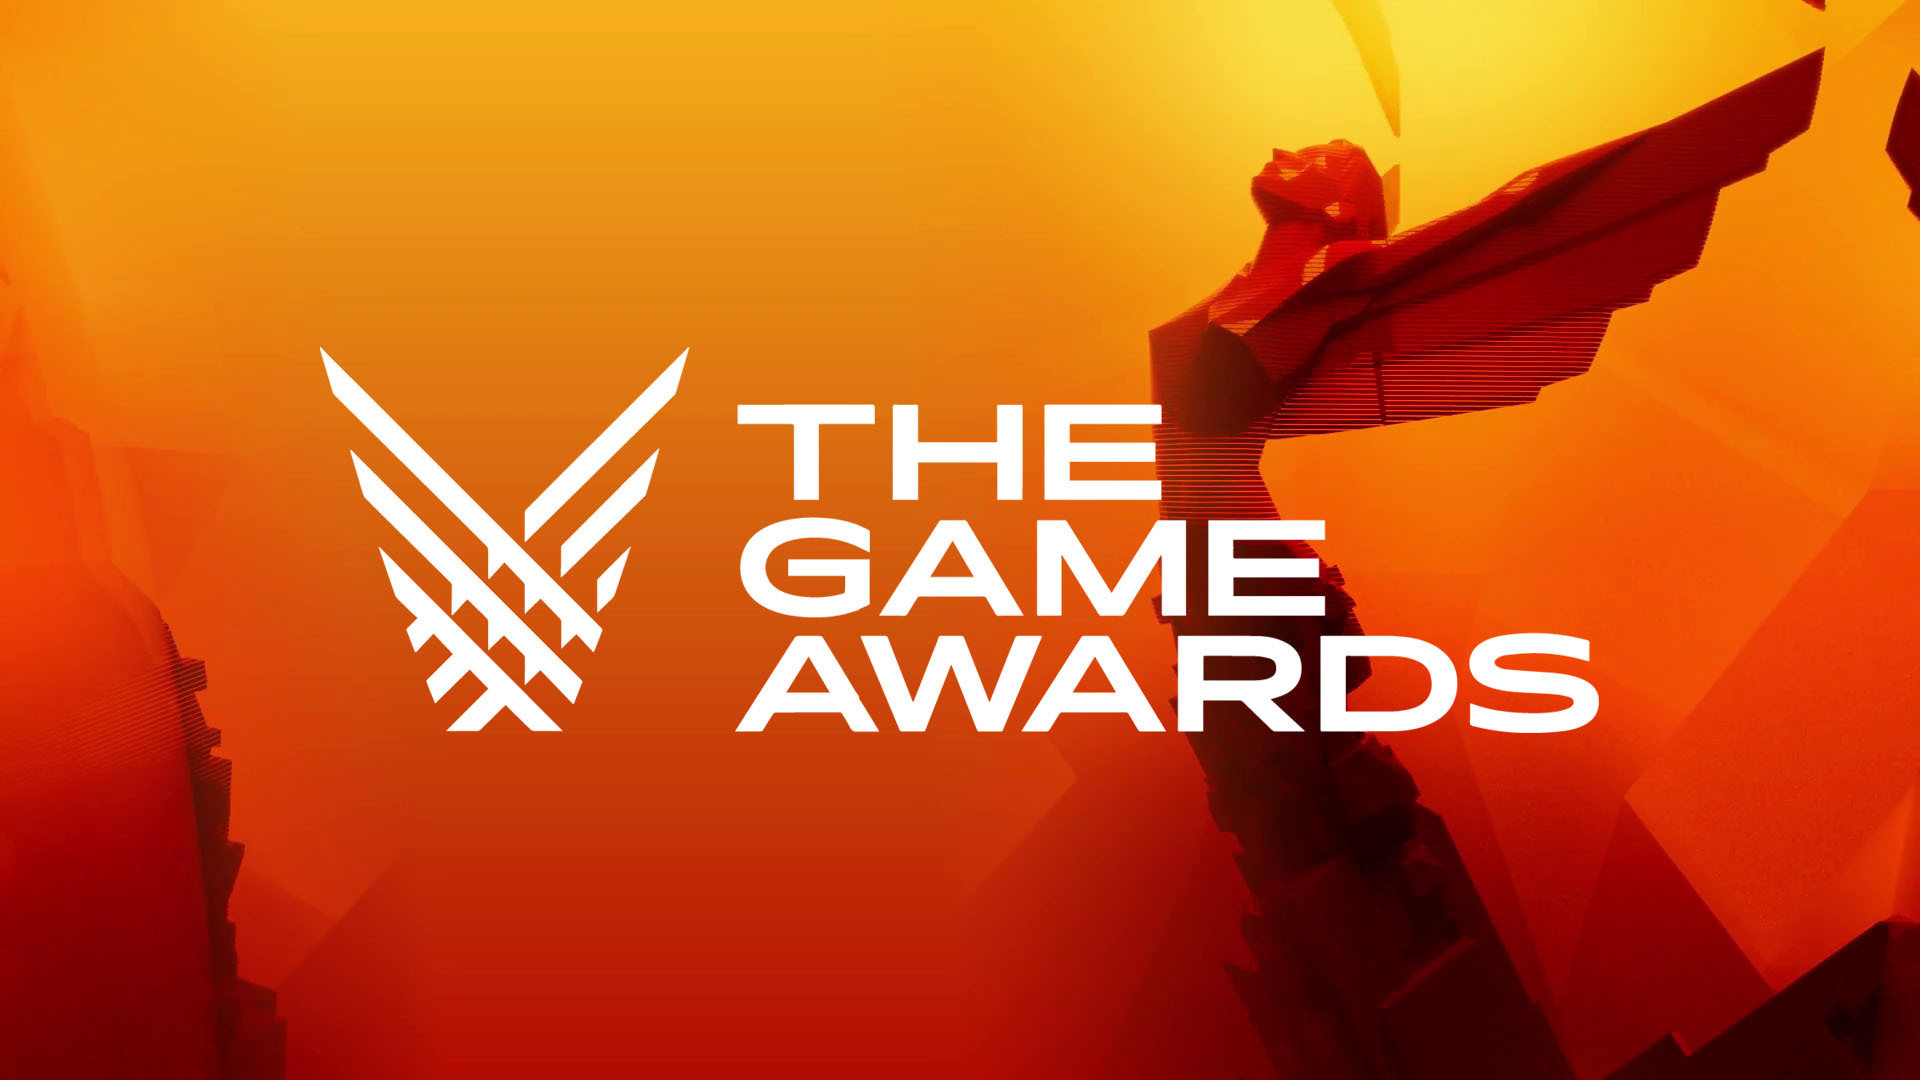 Elden Ring wins Game of the Year; God of War with most wins at The Game Awards 2022